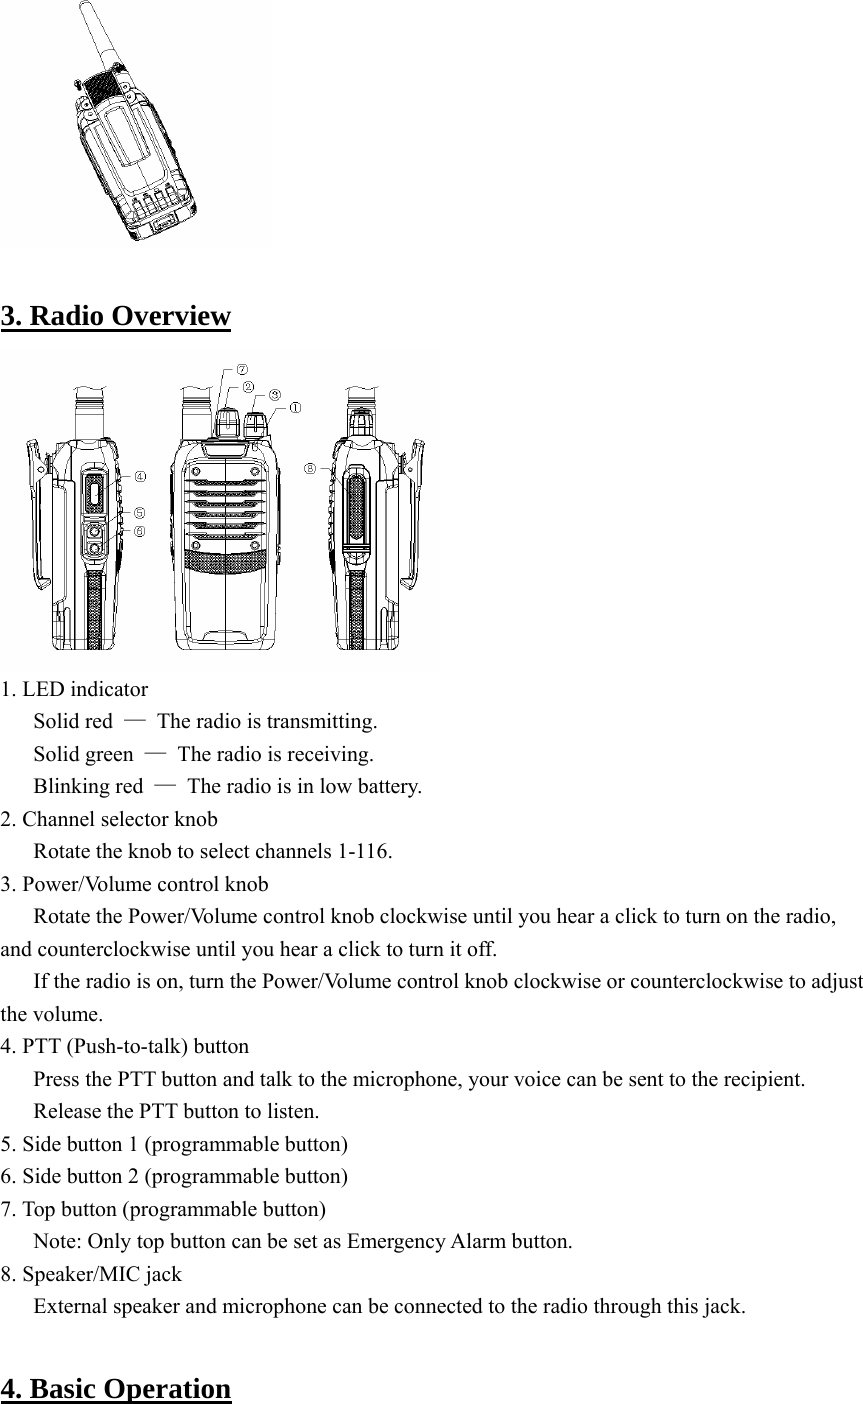   3. Radio Overview  1. LED indicator Solid red  —  The radio is transmitting. Solid green  —  The radio is receiving. Blinking red  —  The radio is in low battery. 2. Channel selector knob Rotate the knob to select channels 1-116. 3. Power/Volume control knob Rotate the Power/Volume control knob clockwise until you hear a click to turn on the radio, and counterclockwise until you hear a click to turn it off.   If the radio is on, turn the Power/Volume control knob clockwise or counterclockwise to adjust the volume.   4. PTT (Push-to-talk) button Press the PTT button and talk to the microphone, your voice can be sent to the recipient. Release the PTT button to listen.   5. Side button 1 (programmable button) 6. Side button 2 (programmable button) 7. Top button (programmable button) Note: Only top button can be set as Emergency Alarm button.   8. Speaker/MIC jack External speaker and microphone can be connected to the radio through this jack.    4. Basic Operation 